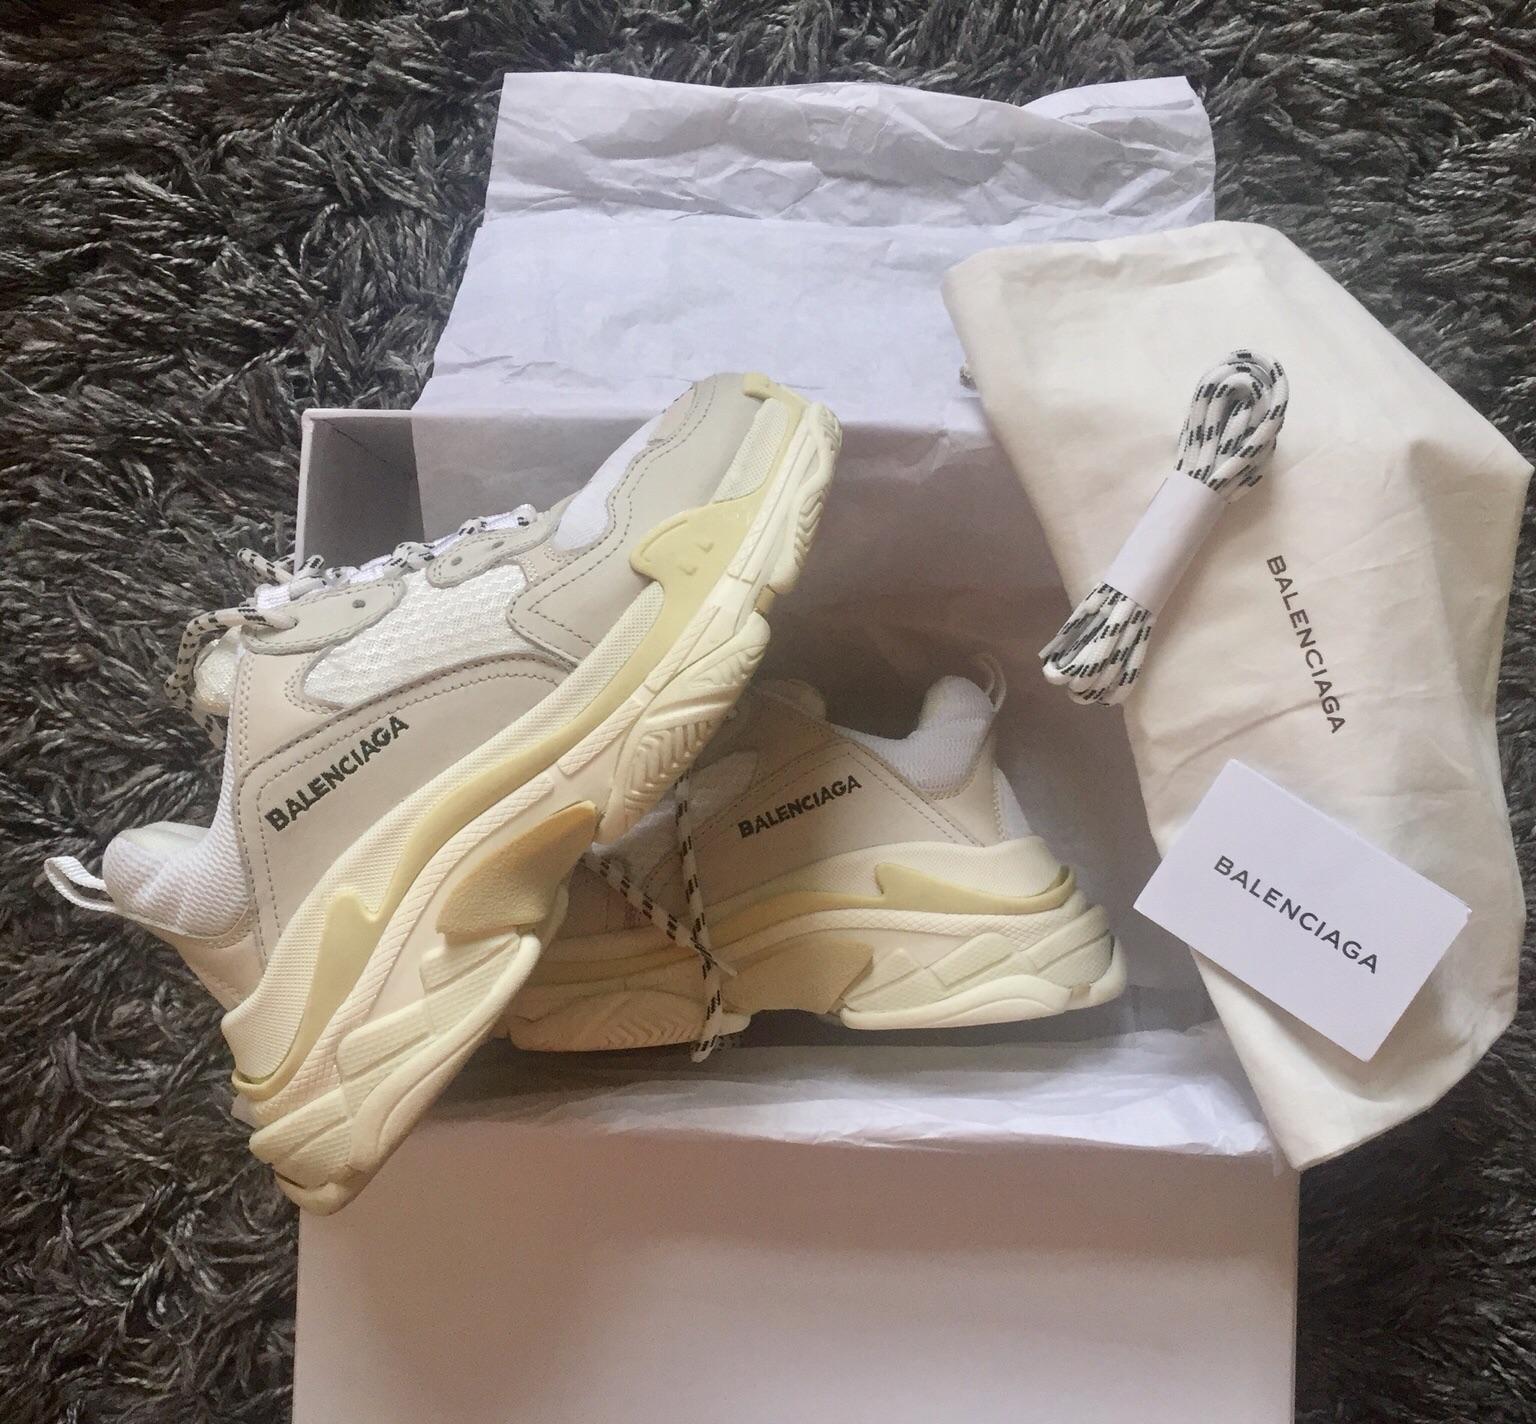 Buy New Balenciaga Triple S Trainers Jaune Fluo sneakers